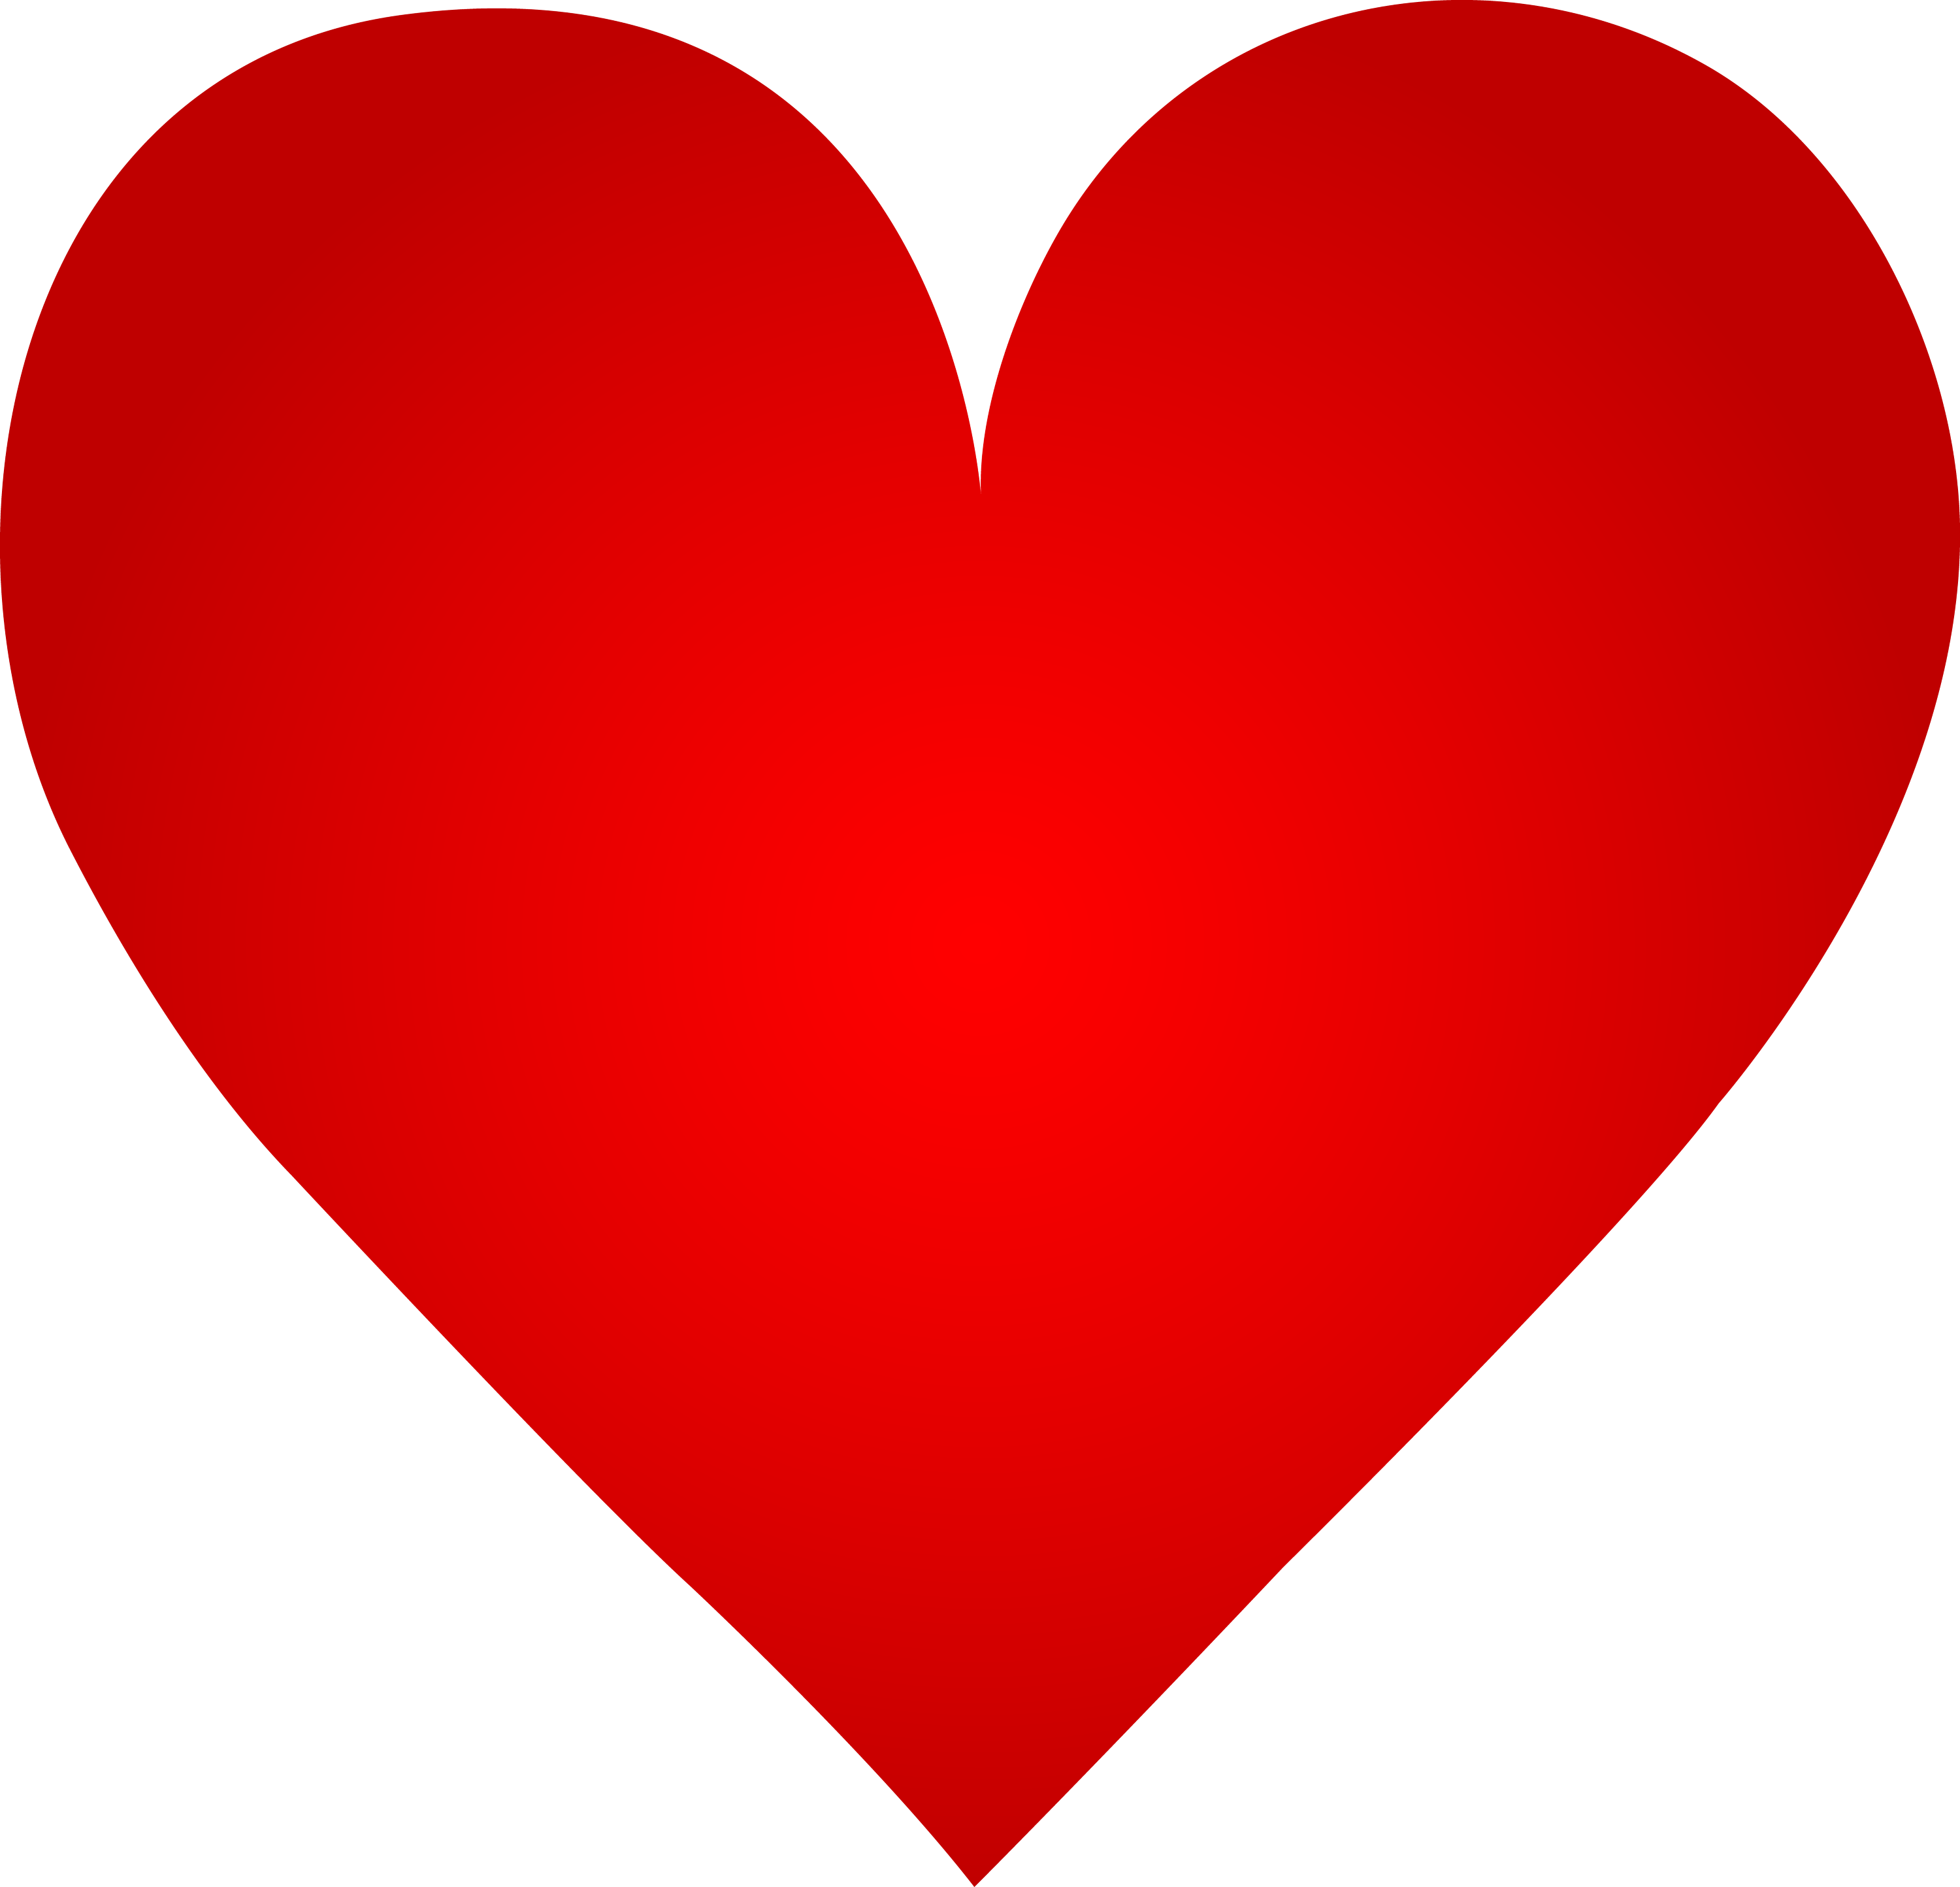 free clipart images of hearts - photo #40